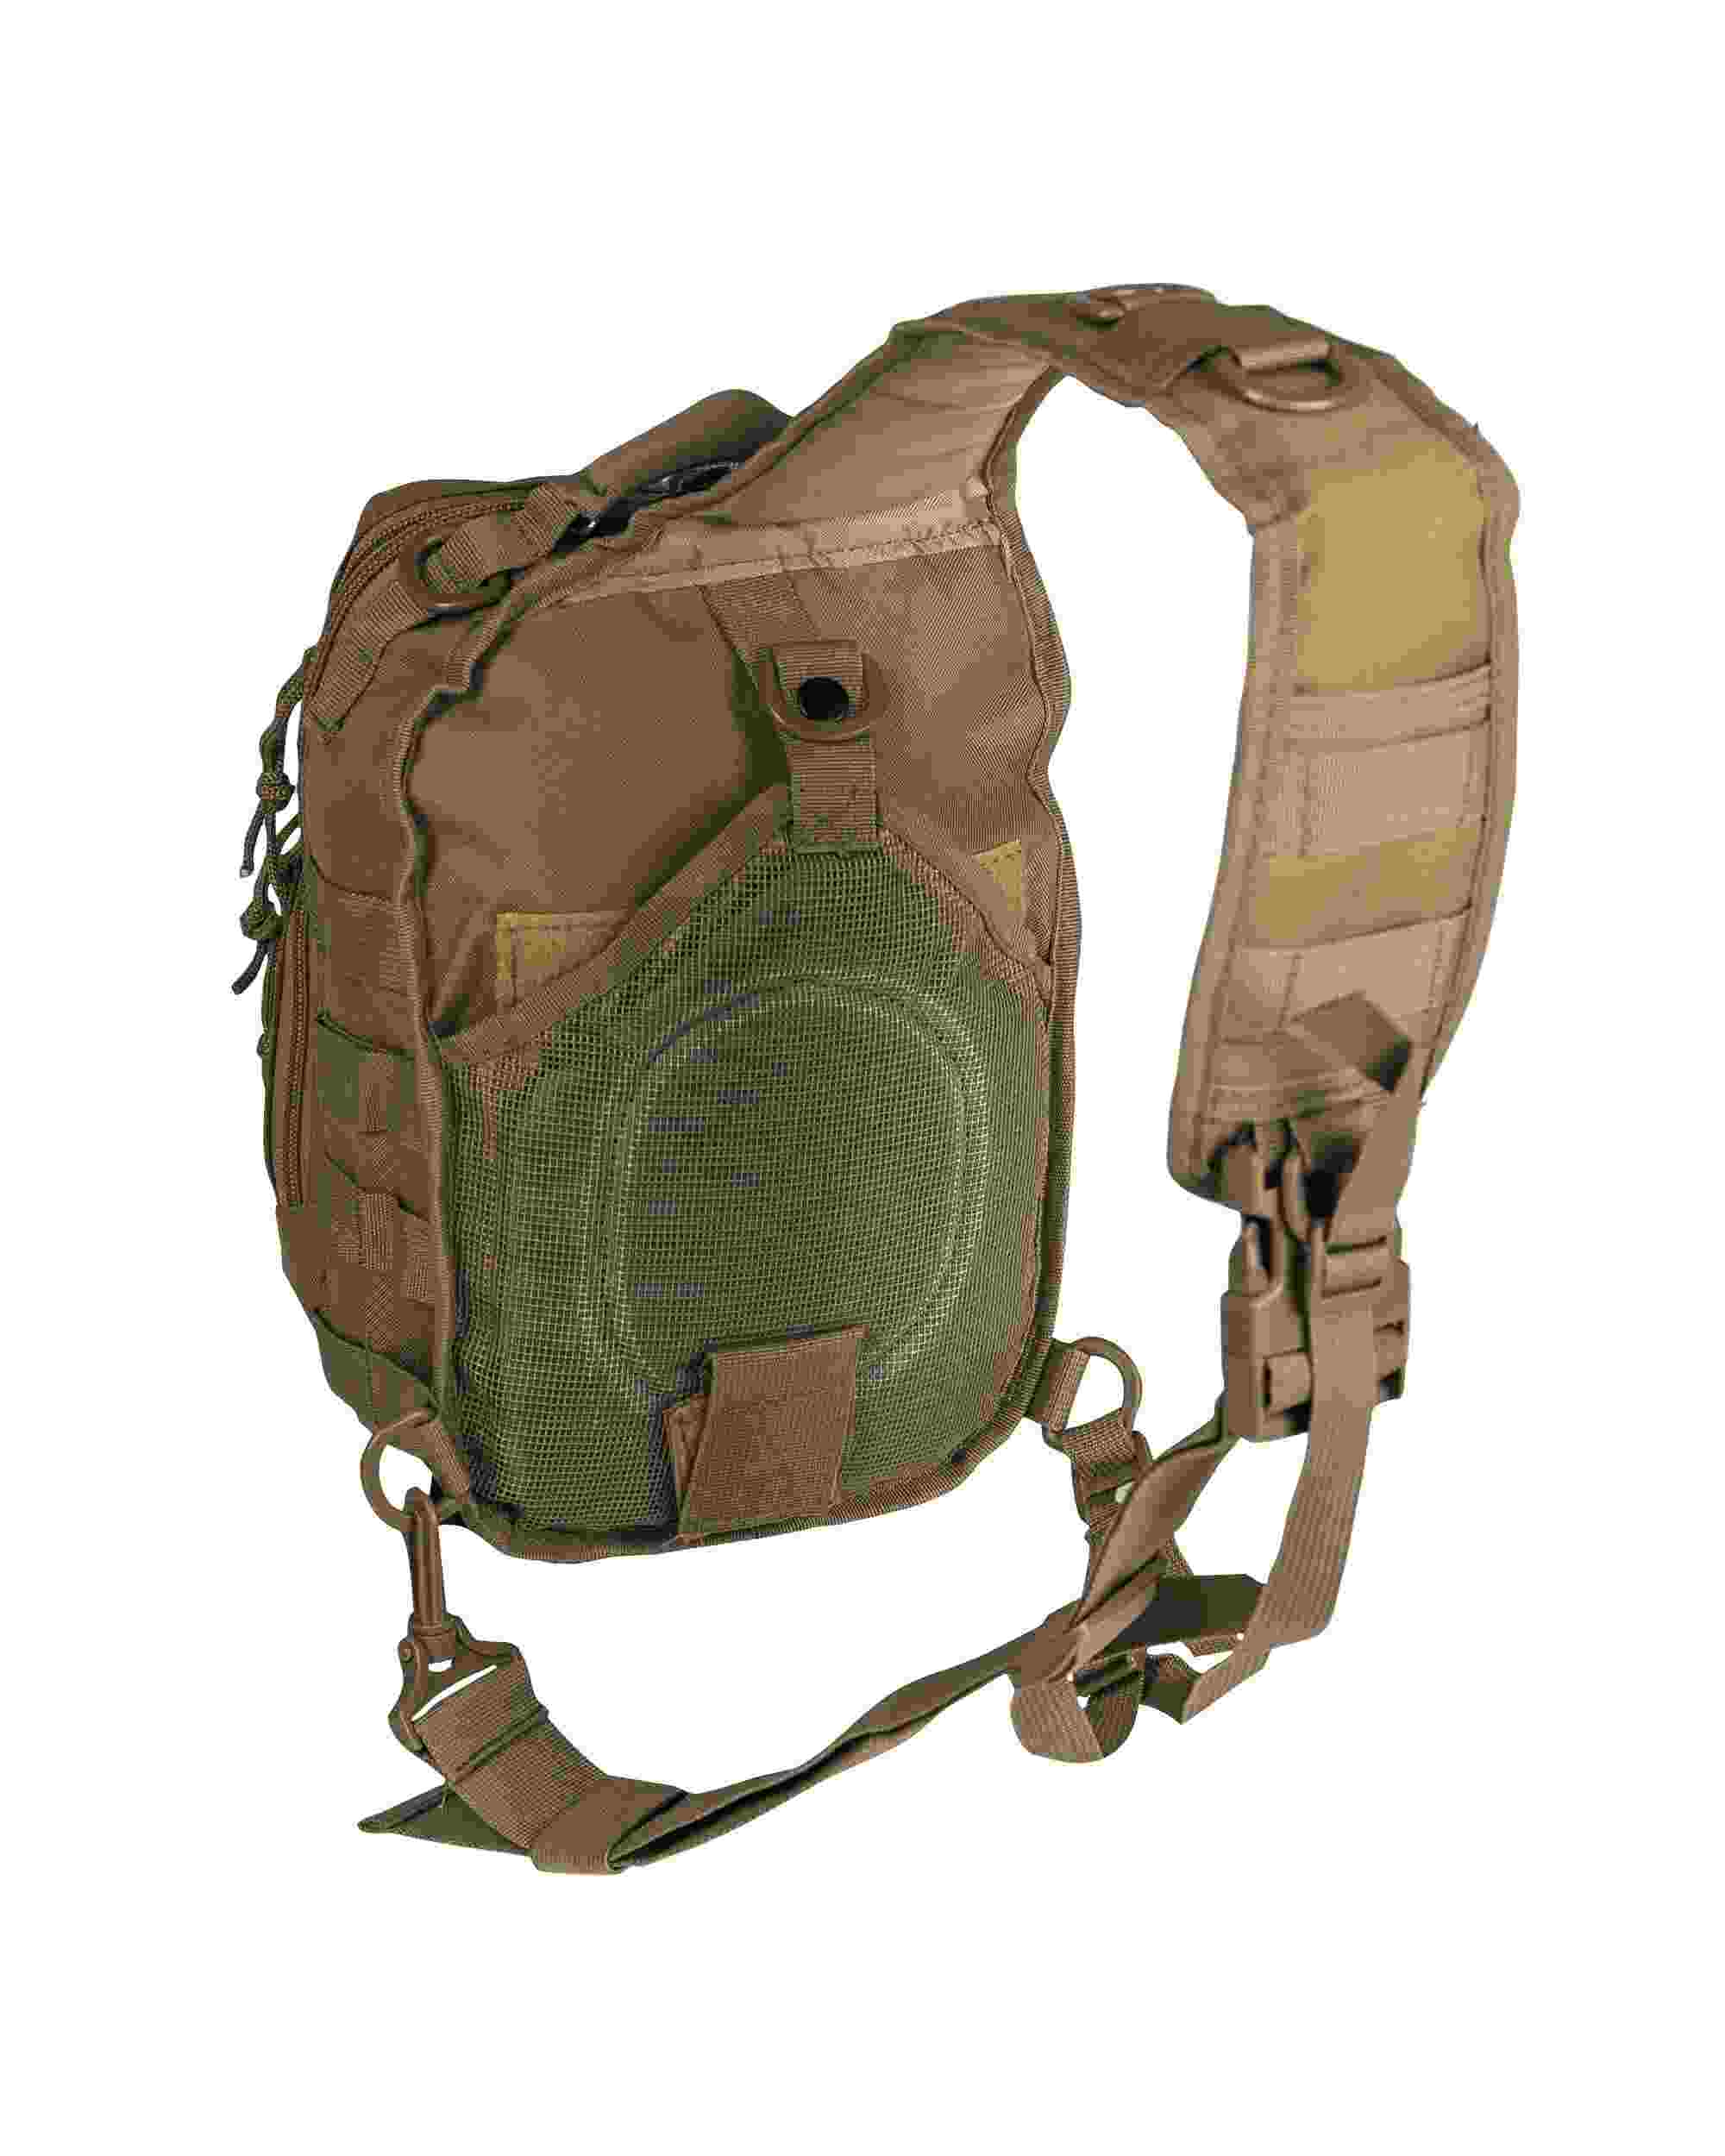 ONE STRAP ASSAULT PACK SM COYOTE